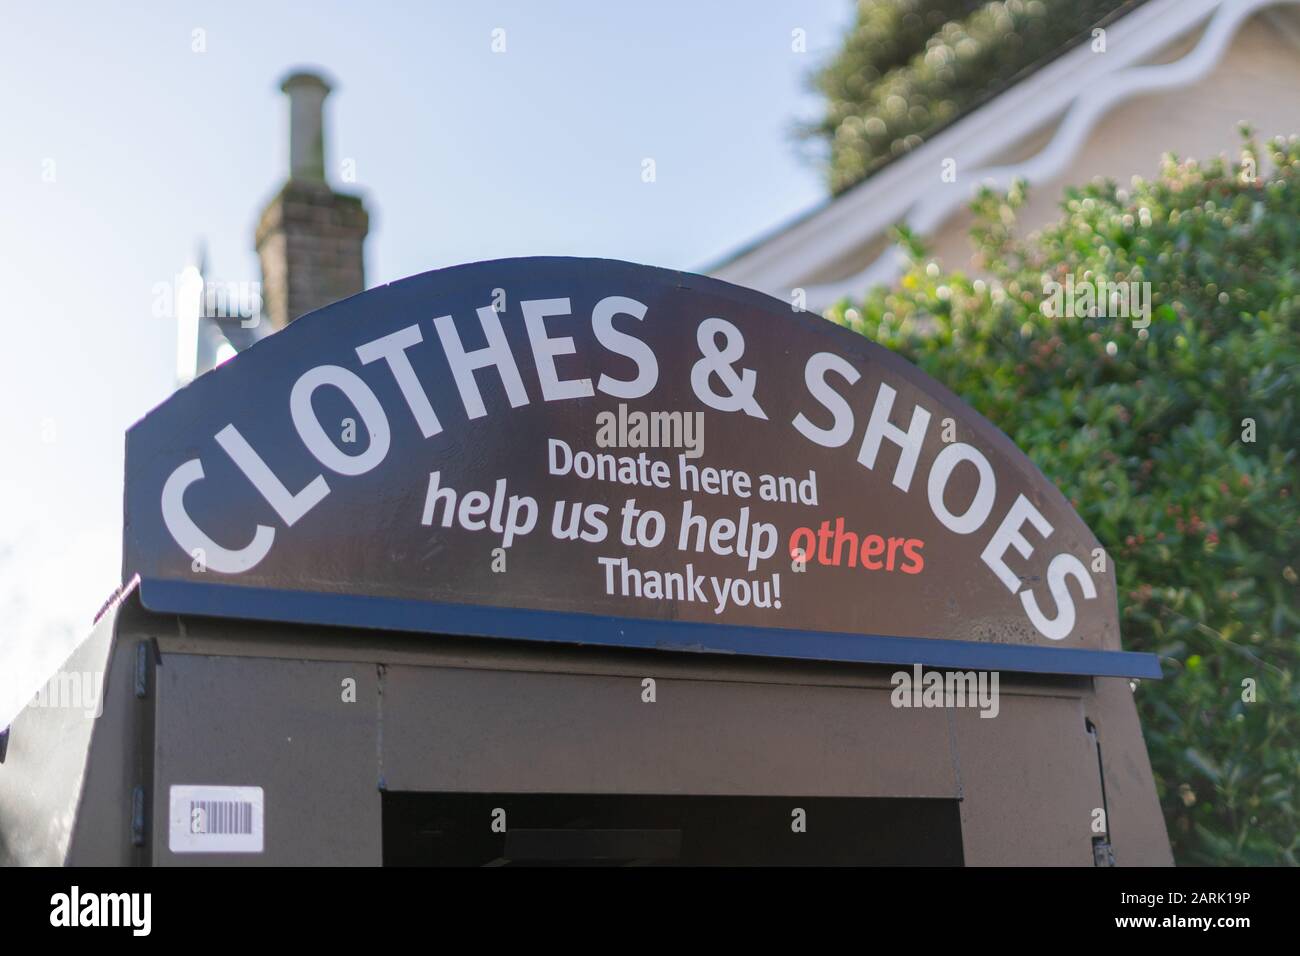 A charity clothes and shoes donation box Stock Photo